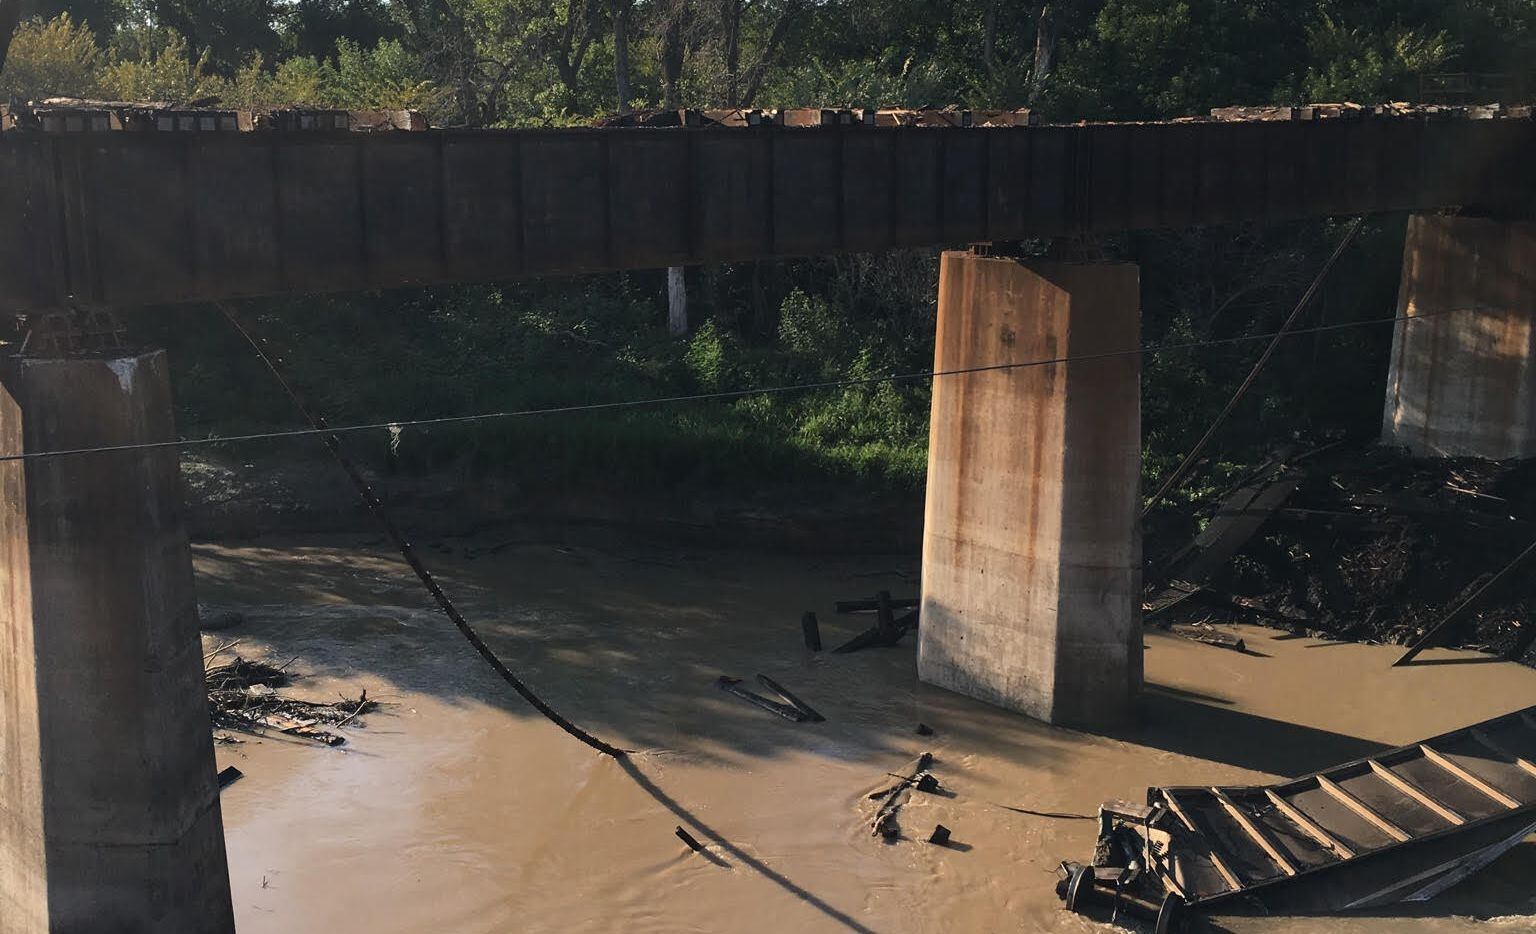 Five Union Pacific train cars fell into Denton Creek on Aug. 21 after a derailment. 